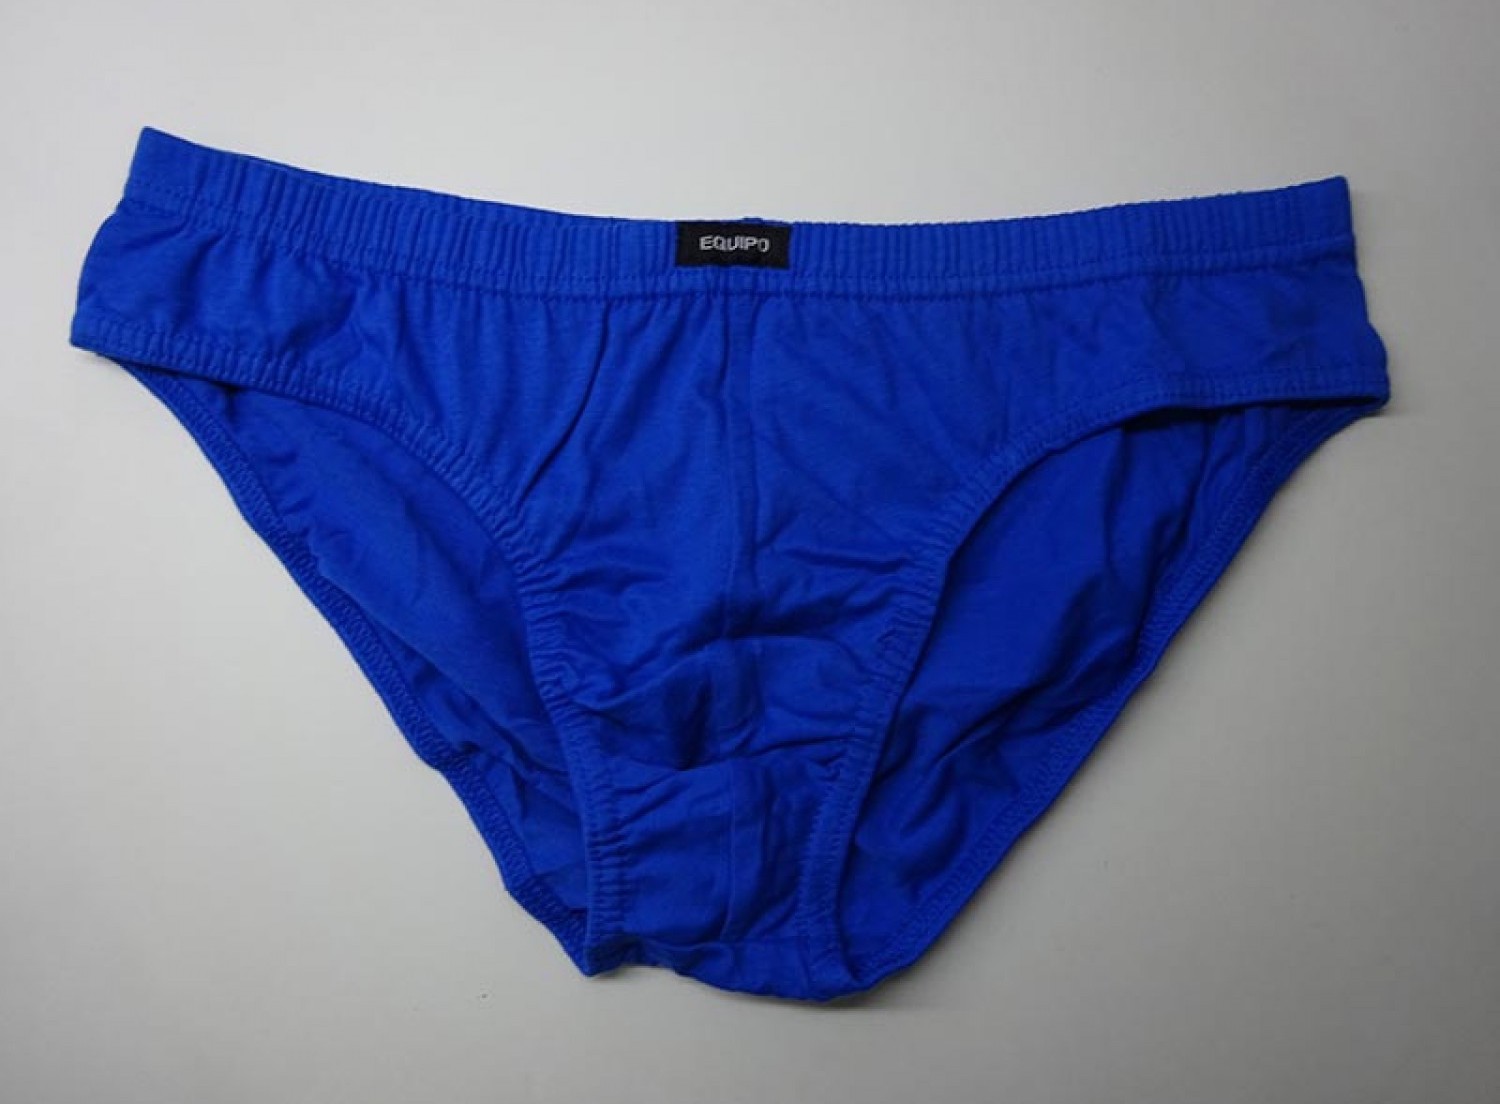 Underwear Review: Equipo - Low Rise briefs